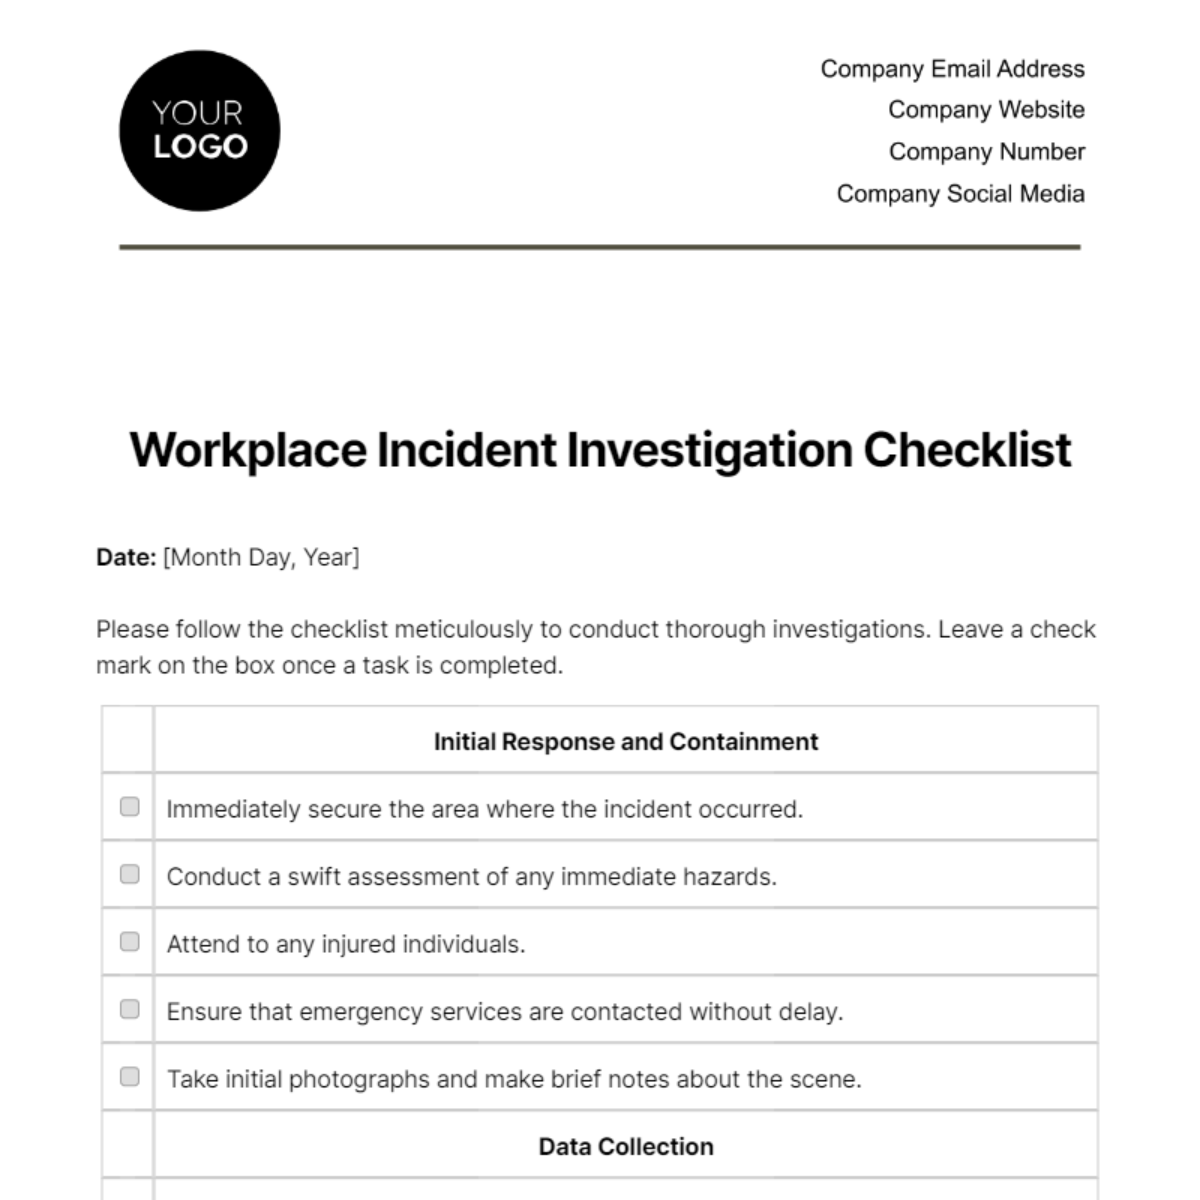 Workplace Incident Investigation Checklist Template